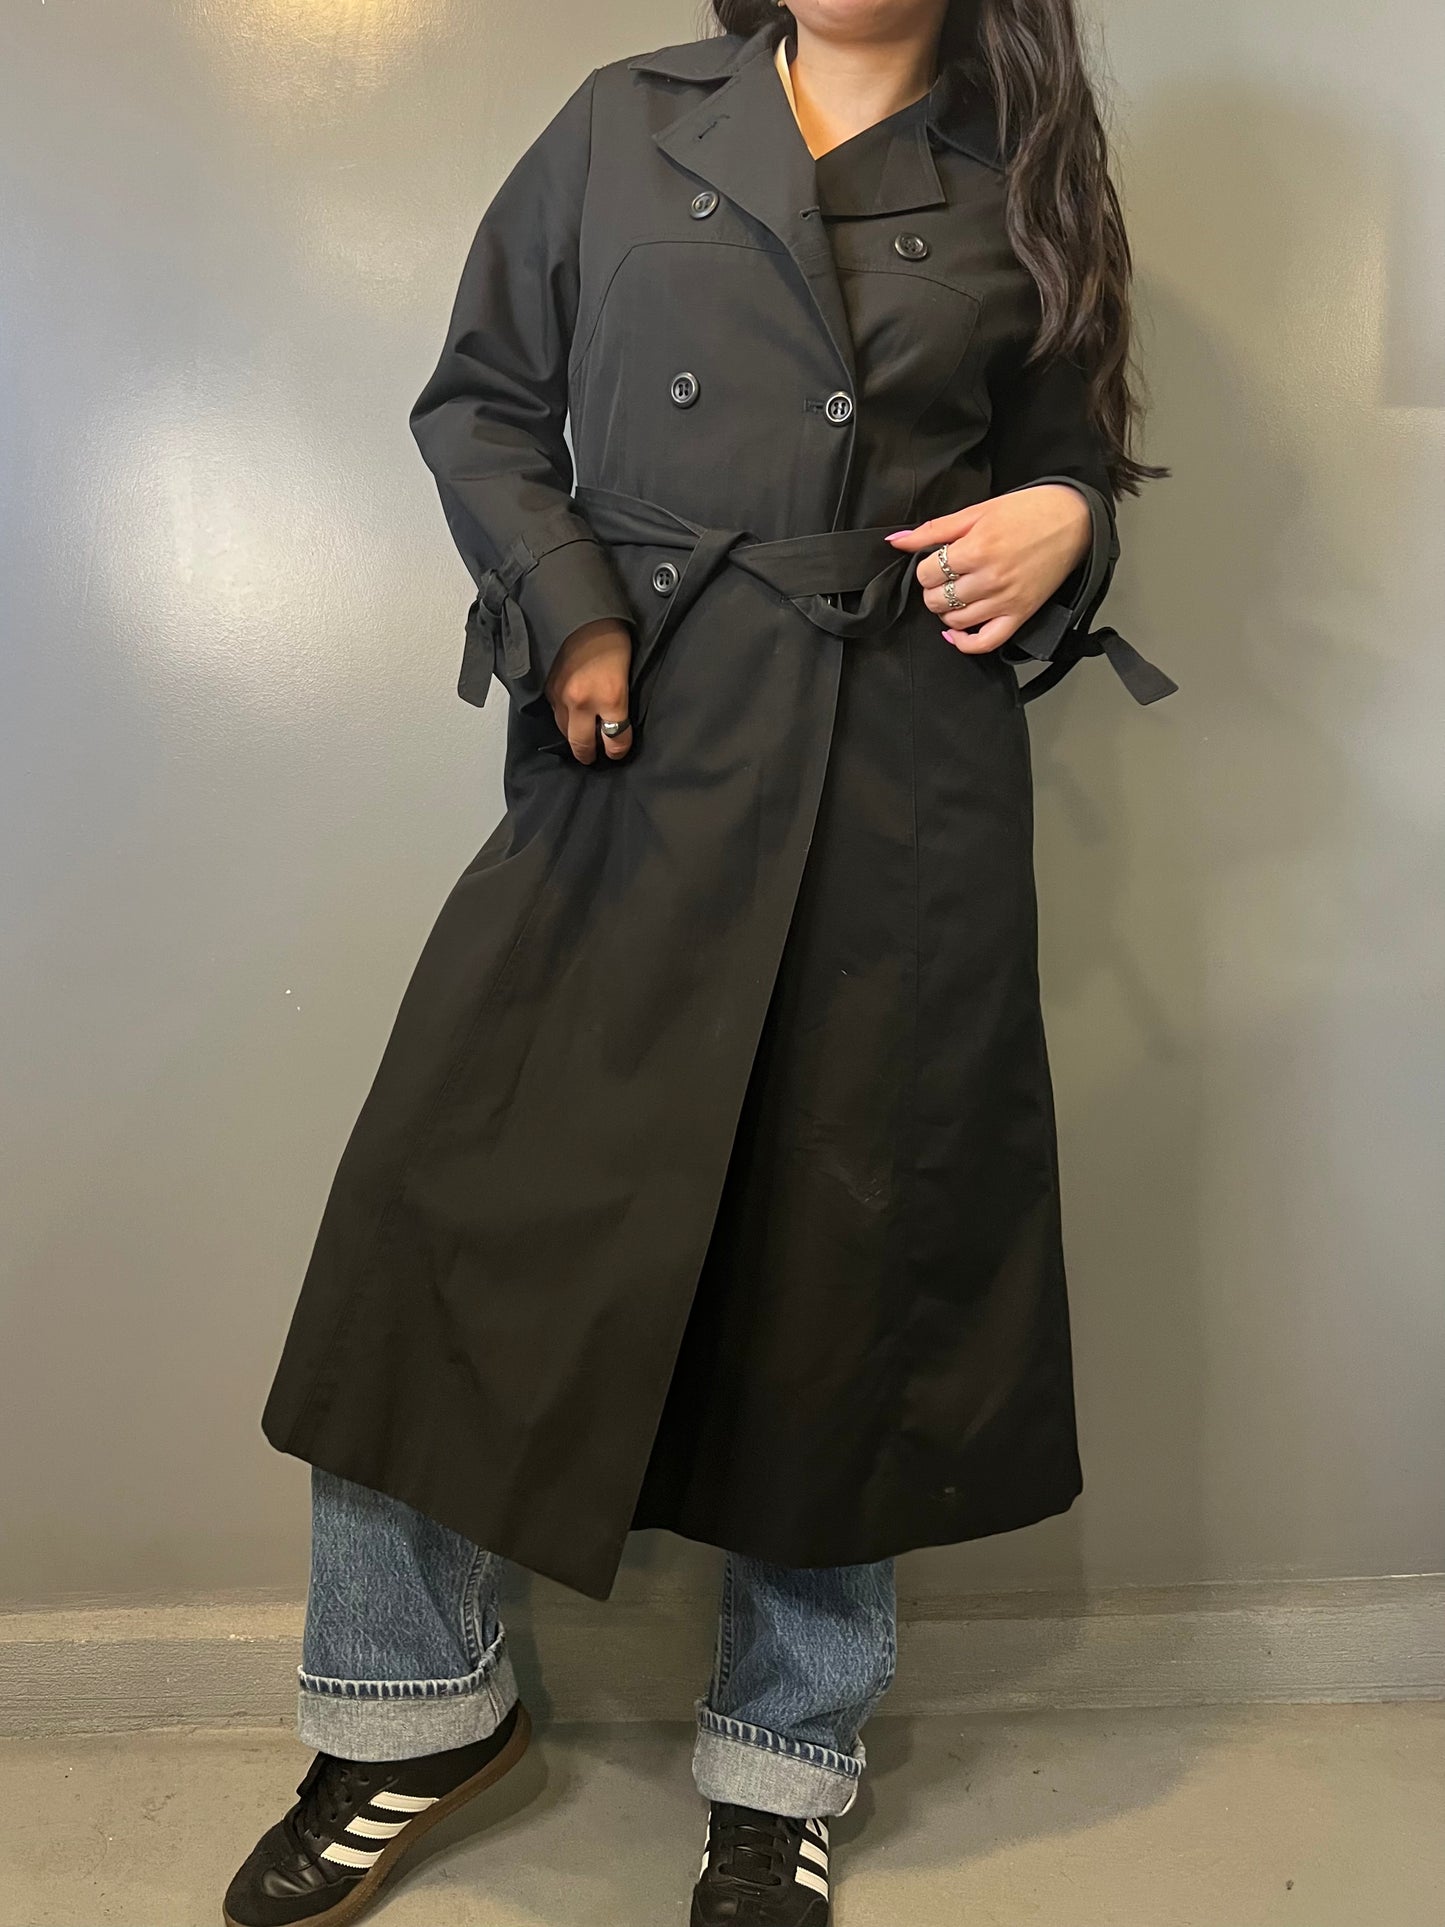 90's Roth-Le Cover Sport Black Trench Coat - S/M